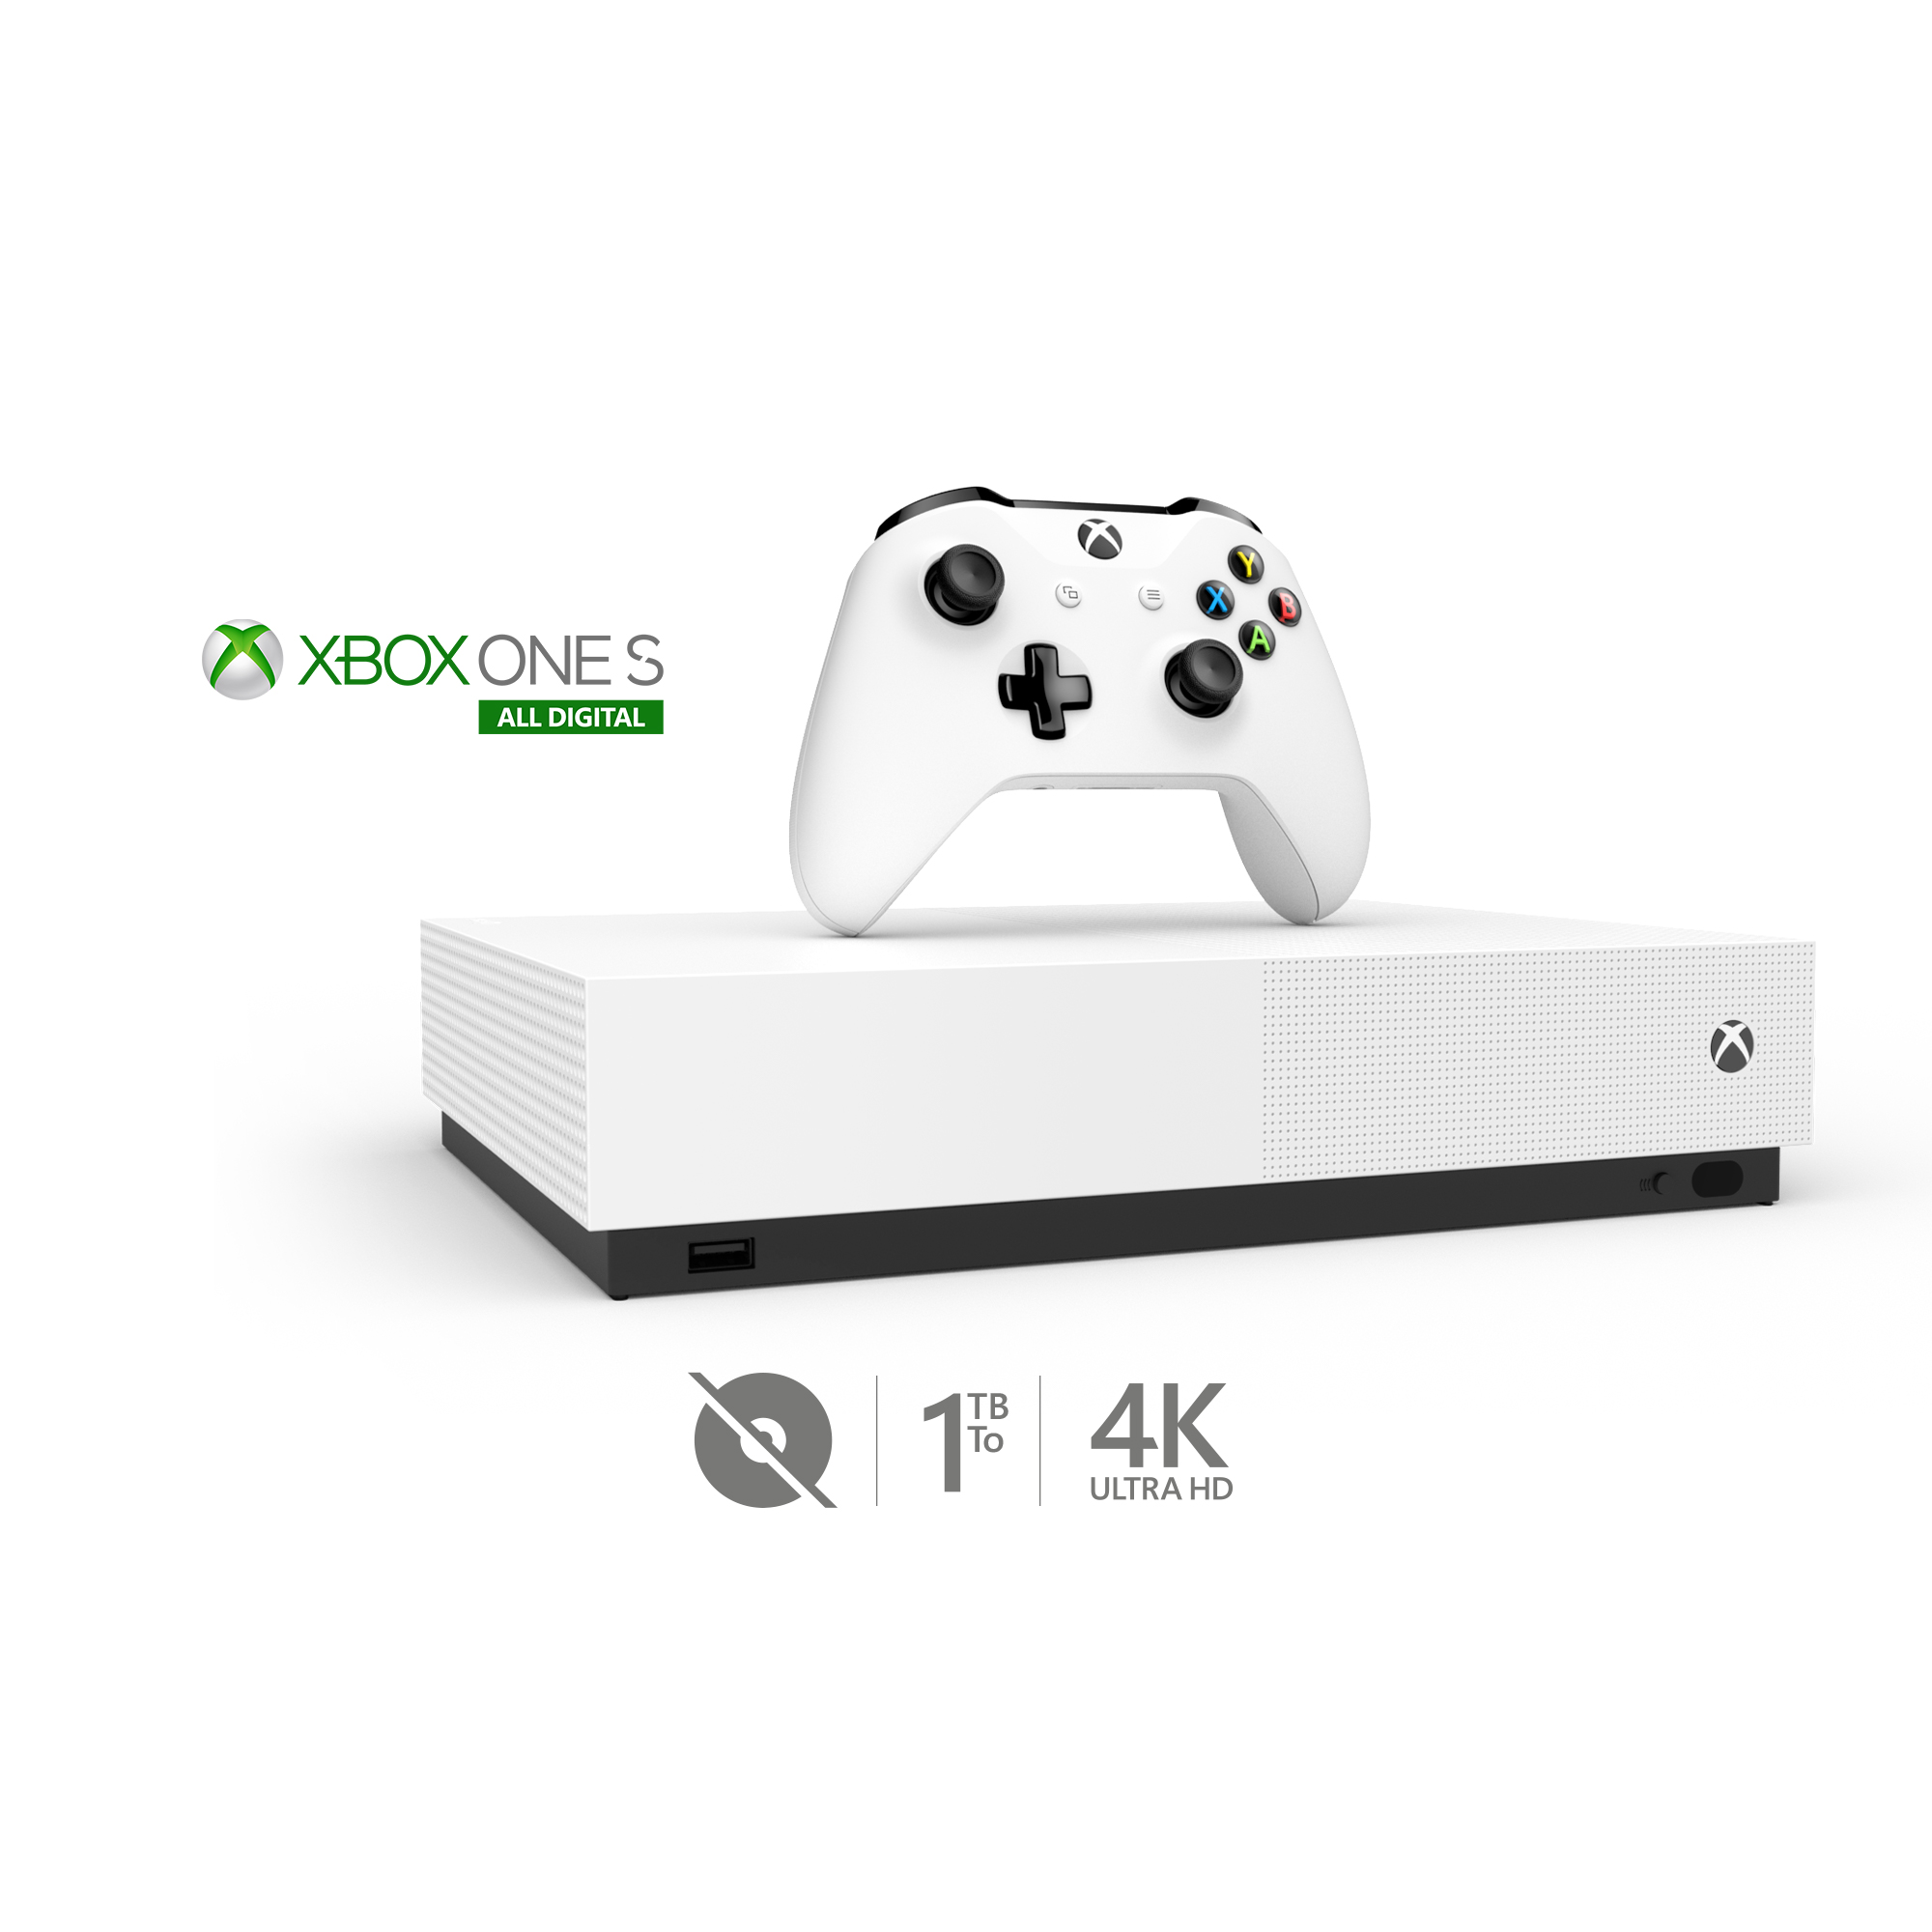 Microsoft Xbox One S 1TB All-Digital Edition Console (Disc-free Gaming), White, NJP-00024 - image 3 of 10